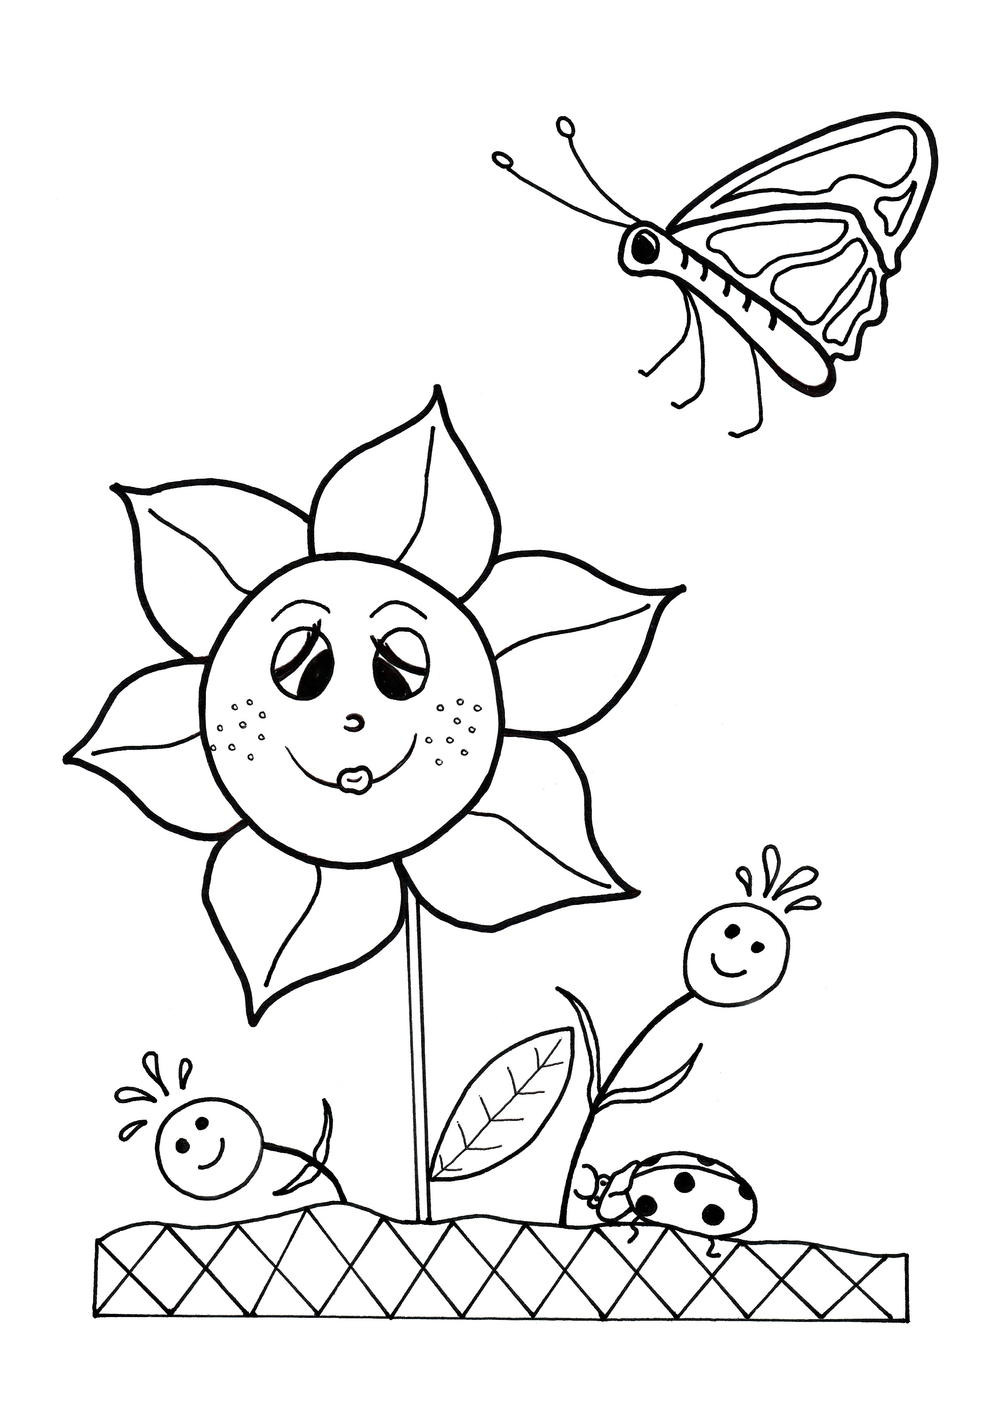 Free Spring Coloring Pages For Kids
 Dancing Flowers Spring Coloring Sheet